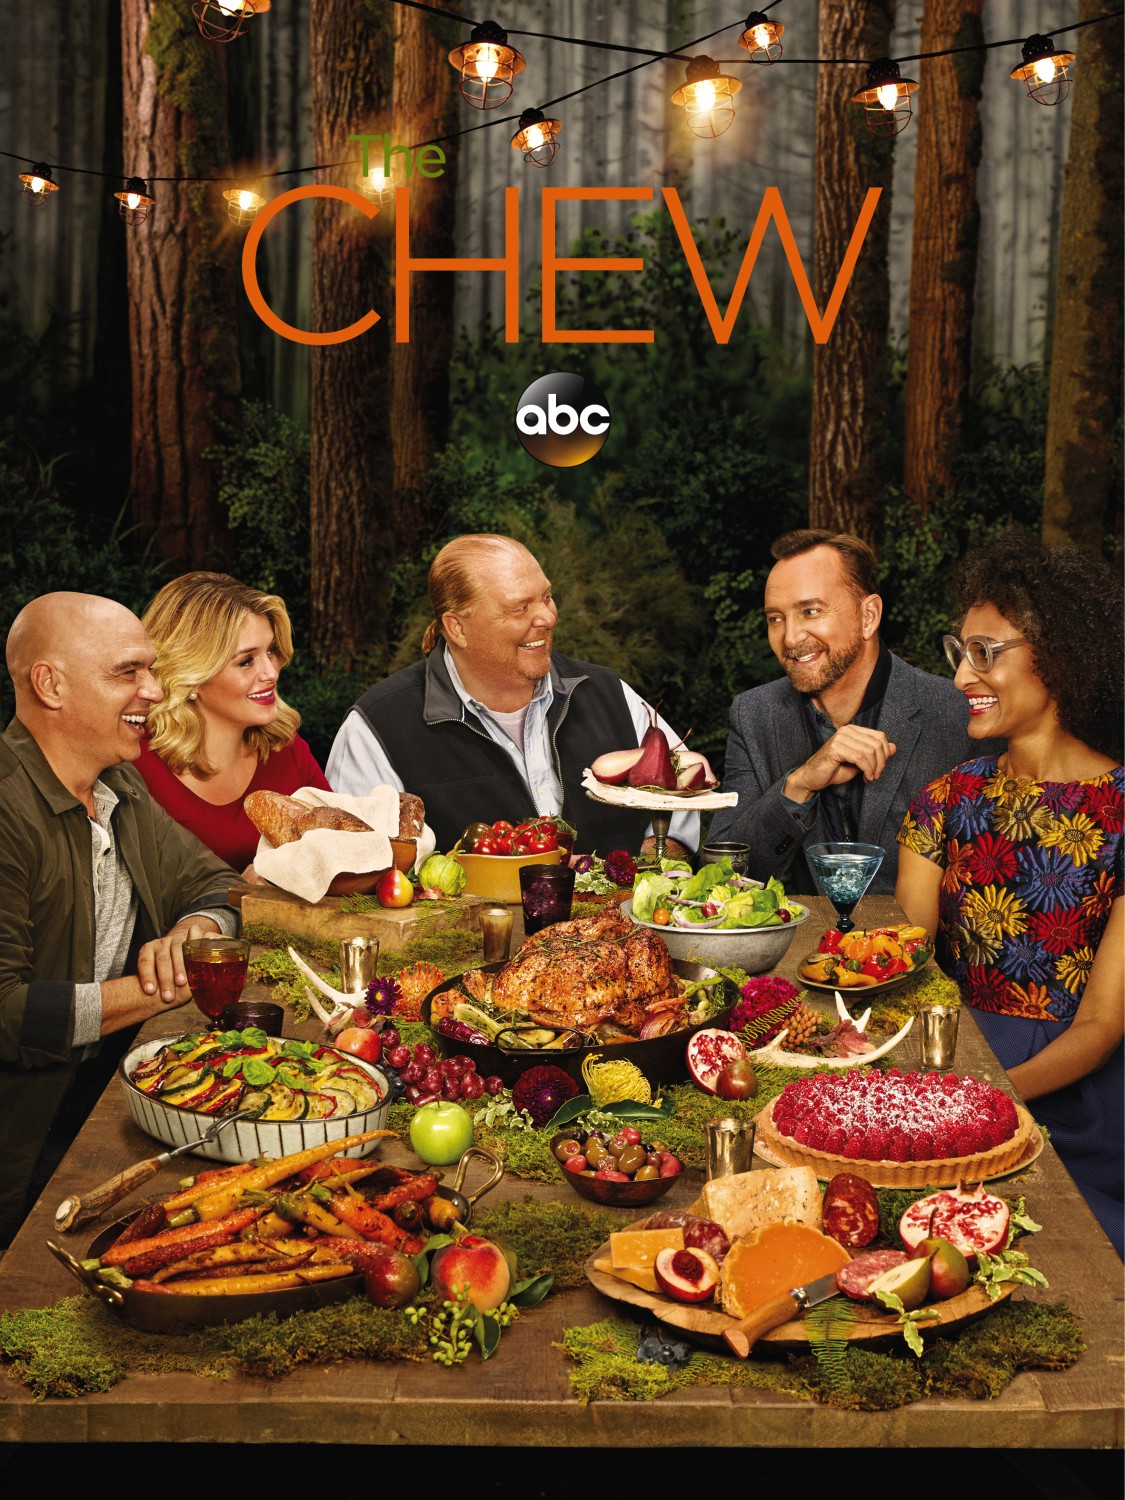 Extra Large TV Poster Image for The Chew (#4 of 11)